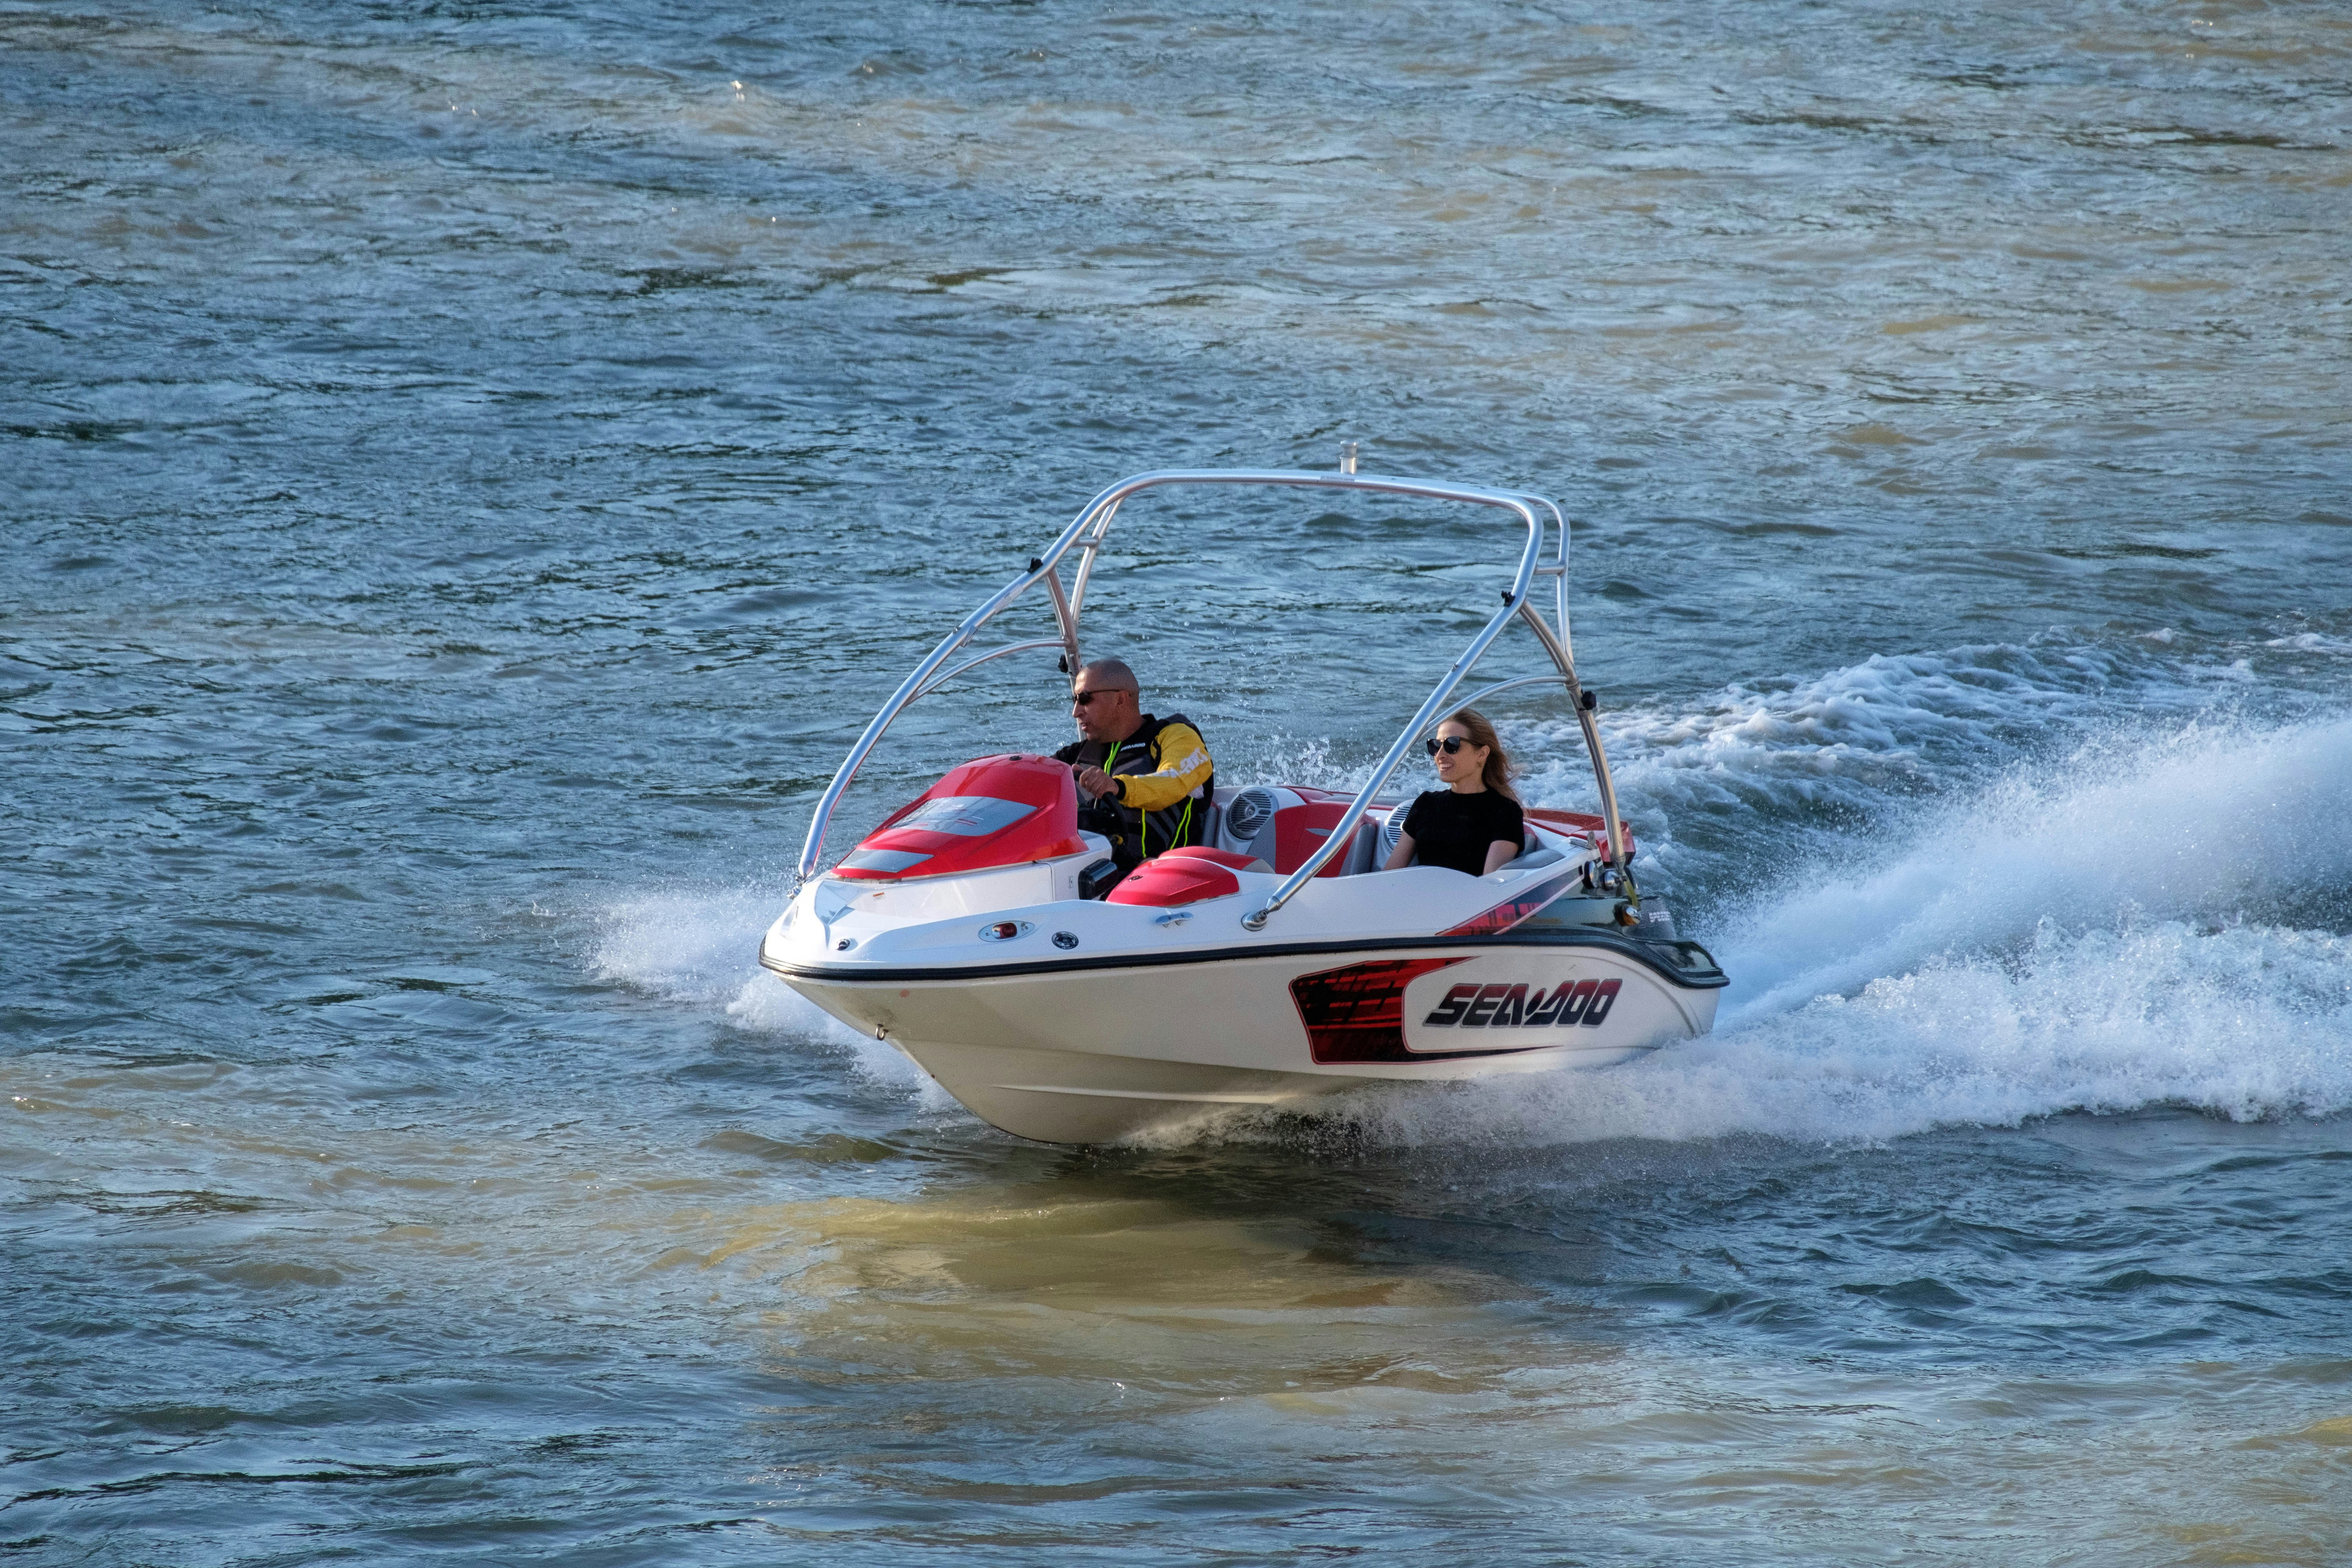 2 men riding on white and red speedboat during daytime